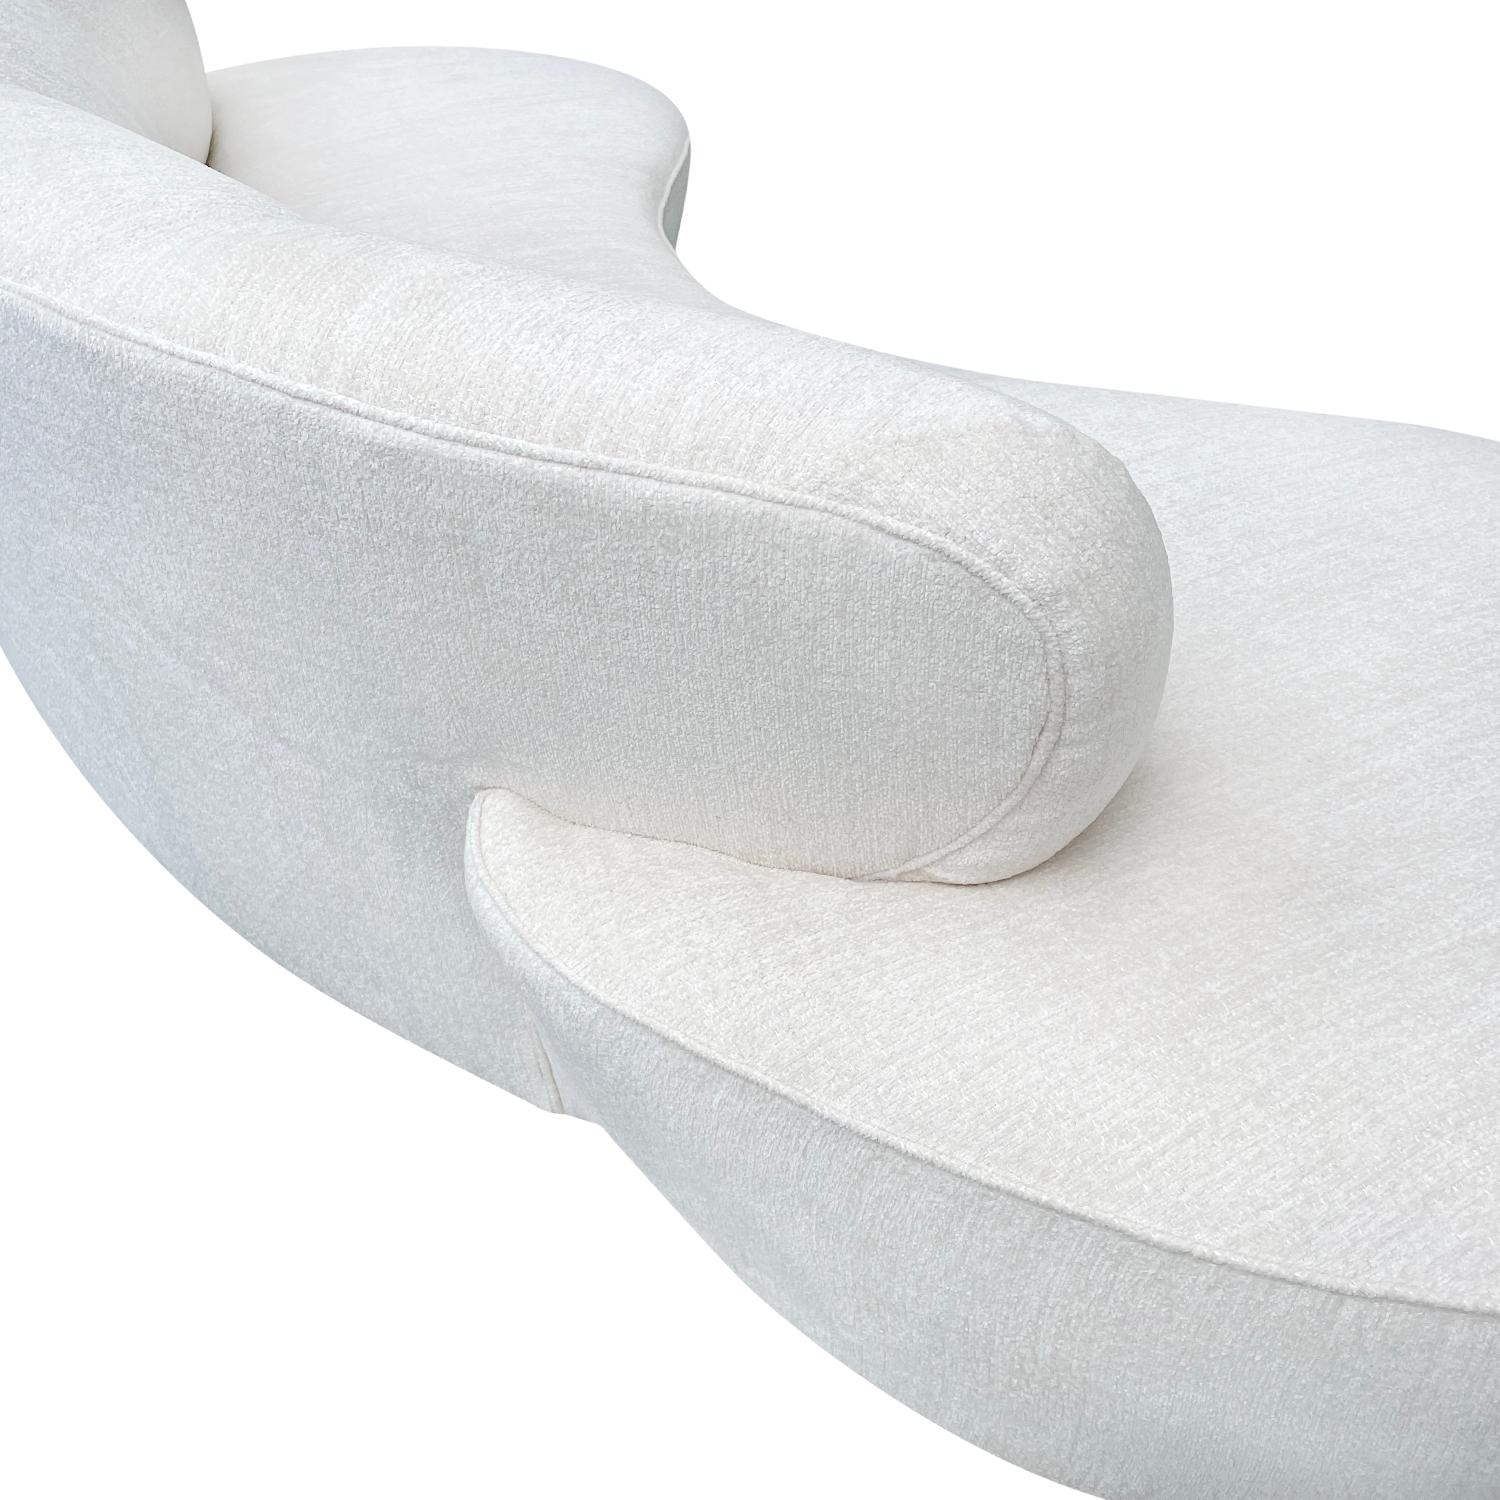 20th Century White American Directional Sofa, Curved Settee by Vladimir Kagan For Sale 5